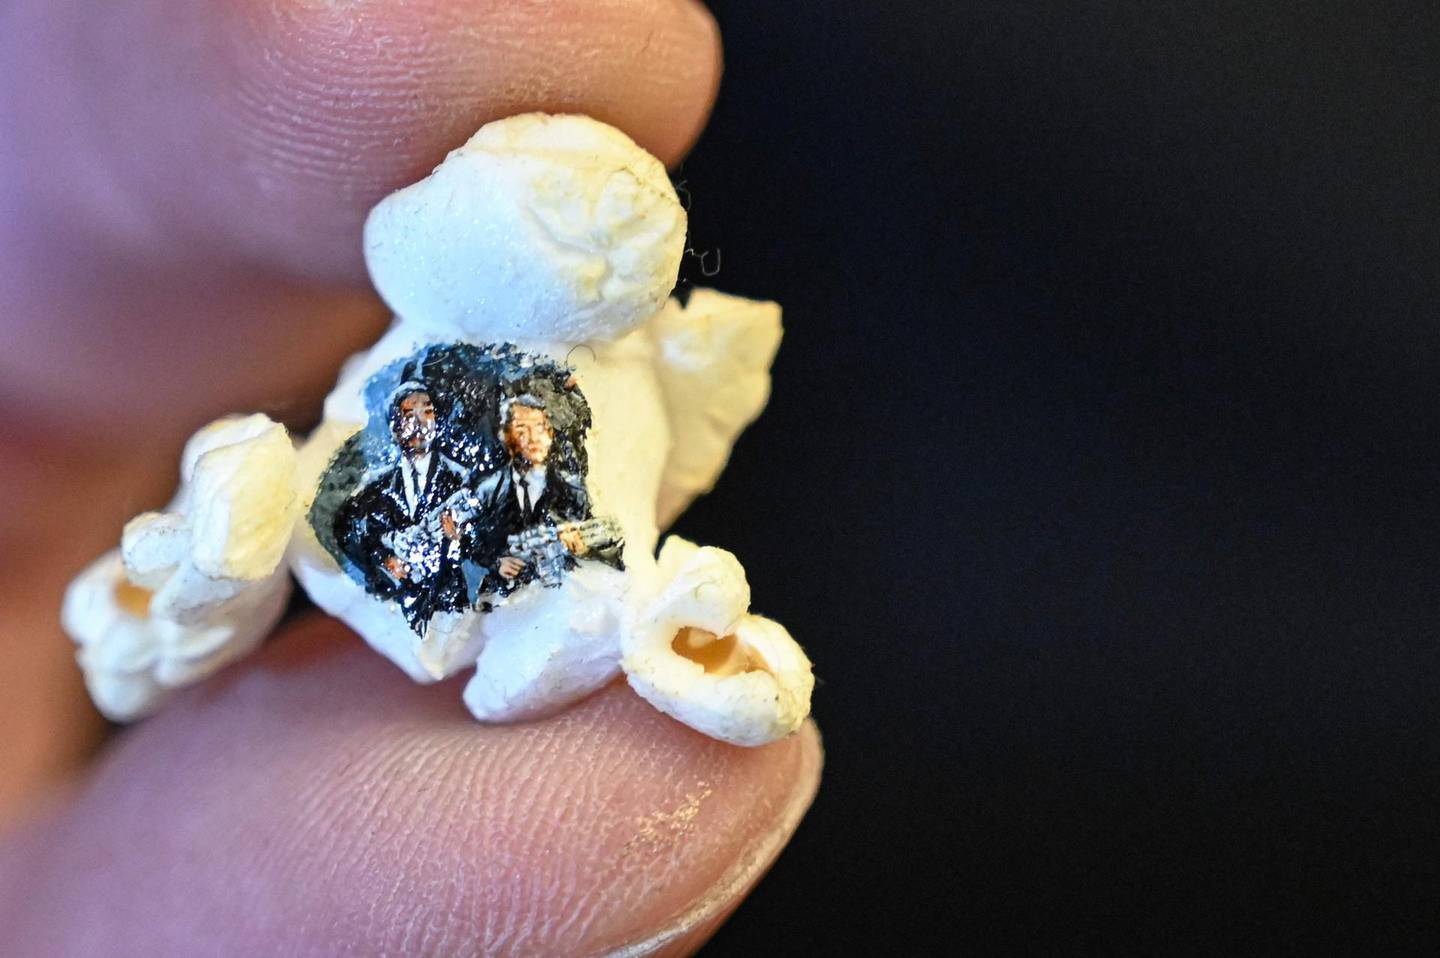 A picture taken on August 23, 2019 shows two armed men in black painted on a popcorn by Turkey's micro artist Hasan Kale in Istanbul.  His canvas could be anything from match sticks, seeds to razors and crown corks. Turkey's micro artist, also known as Turkish Microangelo in reference to Italian Renaissance sculptor and painter Michelangelo, has been hitting his brush onto tiny everyday objects for more than two decades. - RESTRICTED TO EDITORIAL USE - MANDATORY MENTION OF THE ARTIST UPON PUBLICATION - TO ILLUSTRATE THE EVENT AS SPECIFIED IN THE CAPTION
 / AFP / Ozan KOSE / RESTRICTED TO EDITORIAL USE - MANDATORY MENTION OF THE ARTIST UPON PUBLICATION - TO ILLUSTRATE THE EVENT AS SPECIFIED IN THE CAPTION
